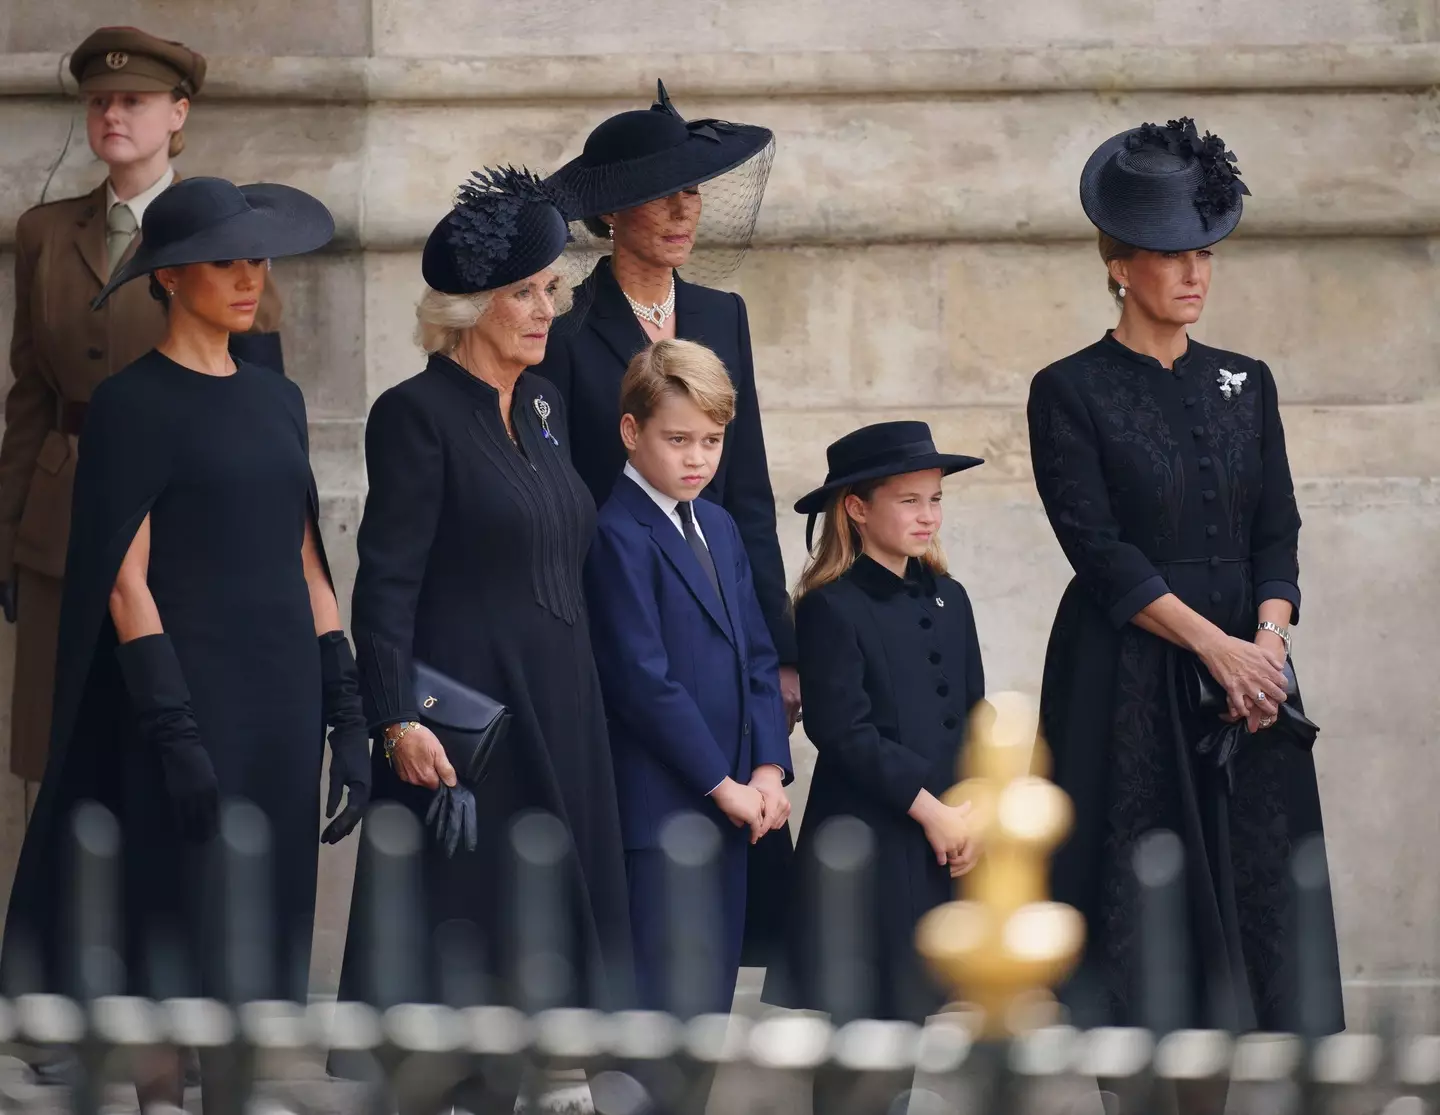 Buckingham Palace has put an emphasis on respecting the Royal Family's need to grieve.